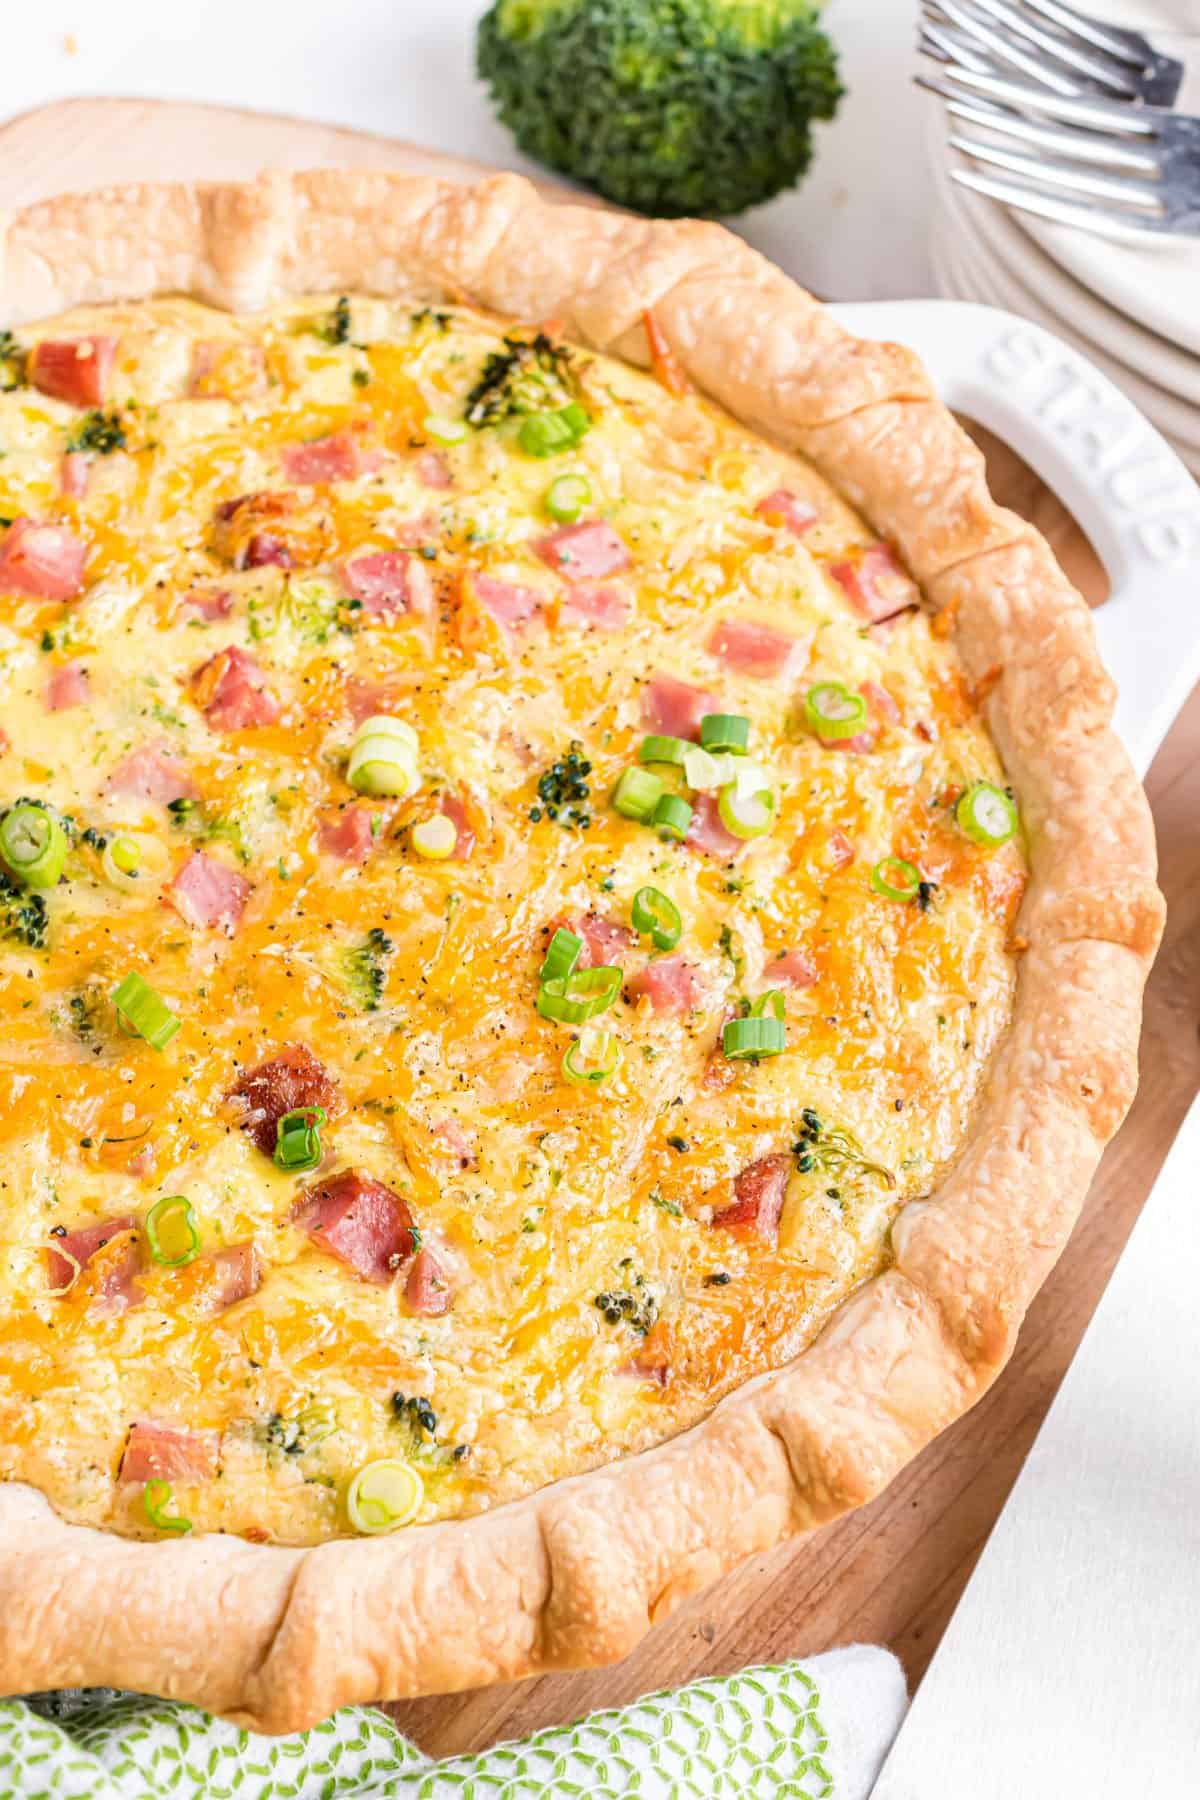 Baked ham and cheese quiche in a white pie plate.